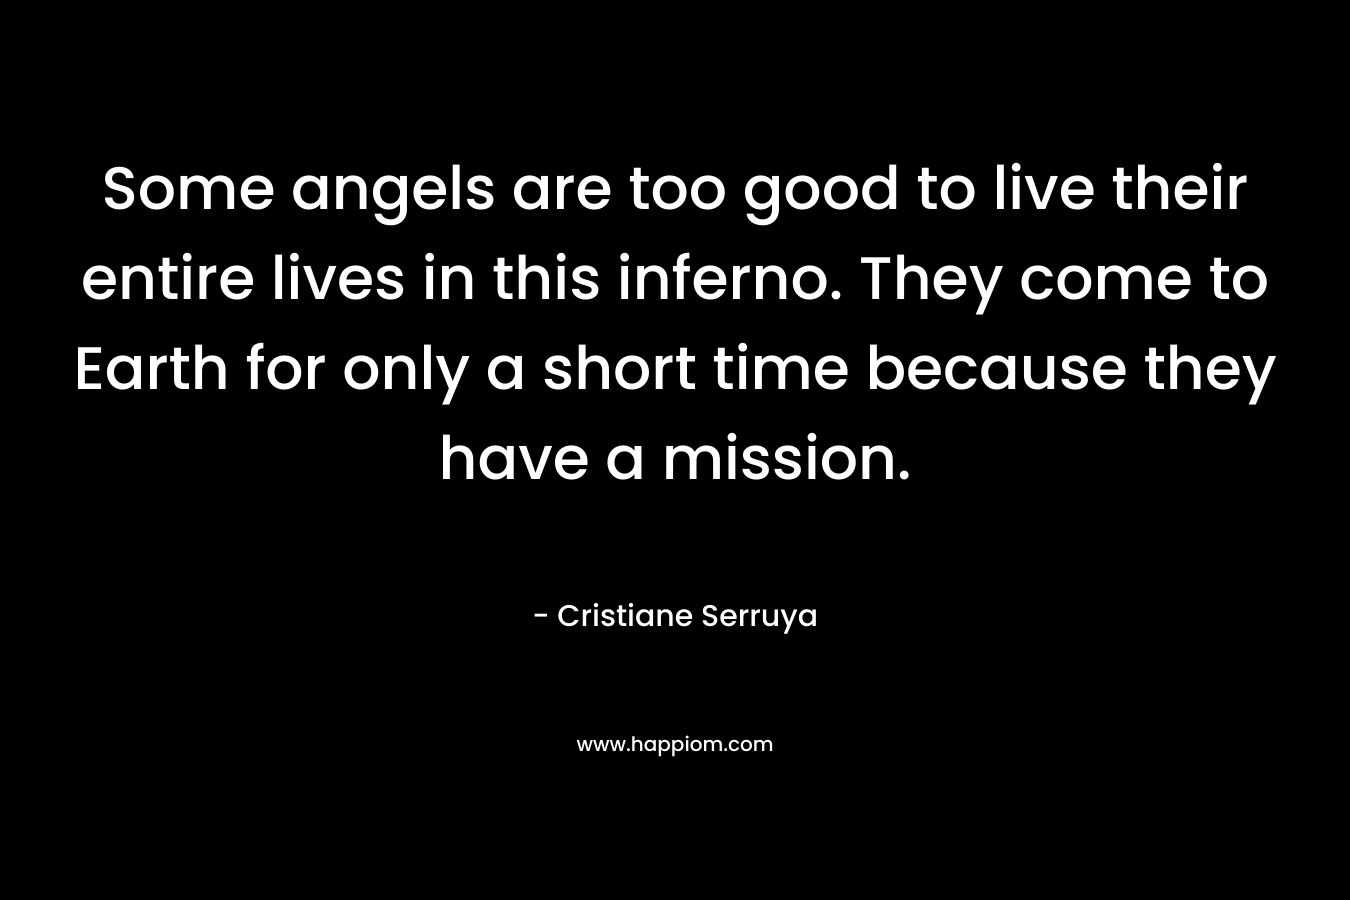 Some angels are too good to live their entire lives in this inferno. They come to Earth for only a short time because they have a mission.